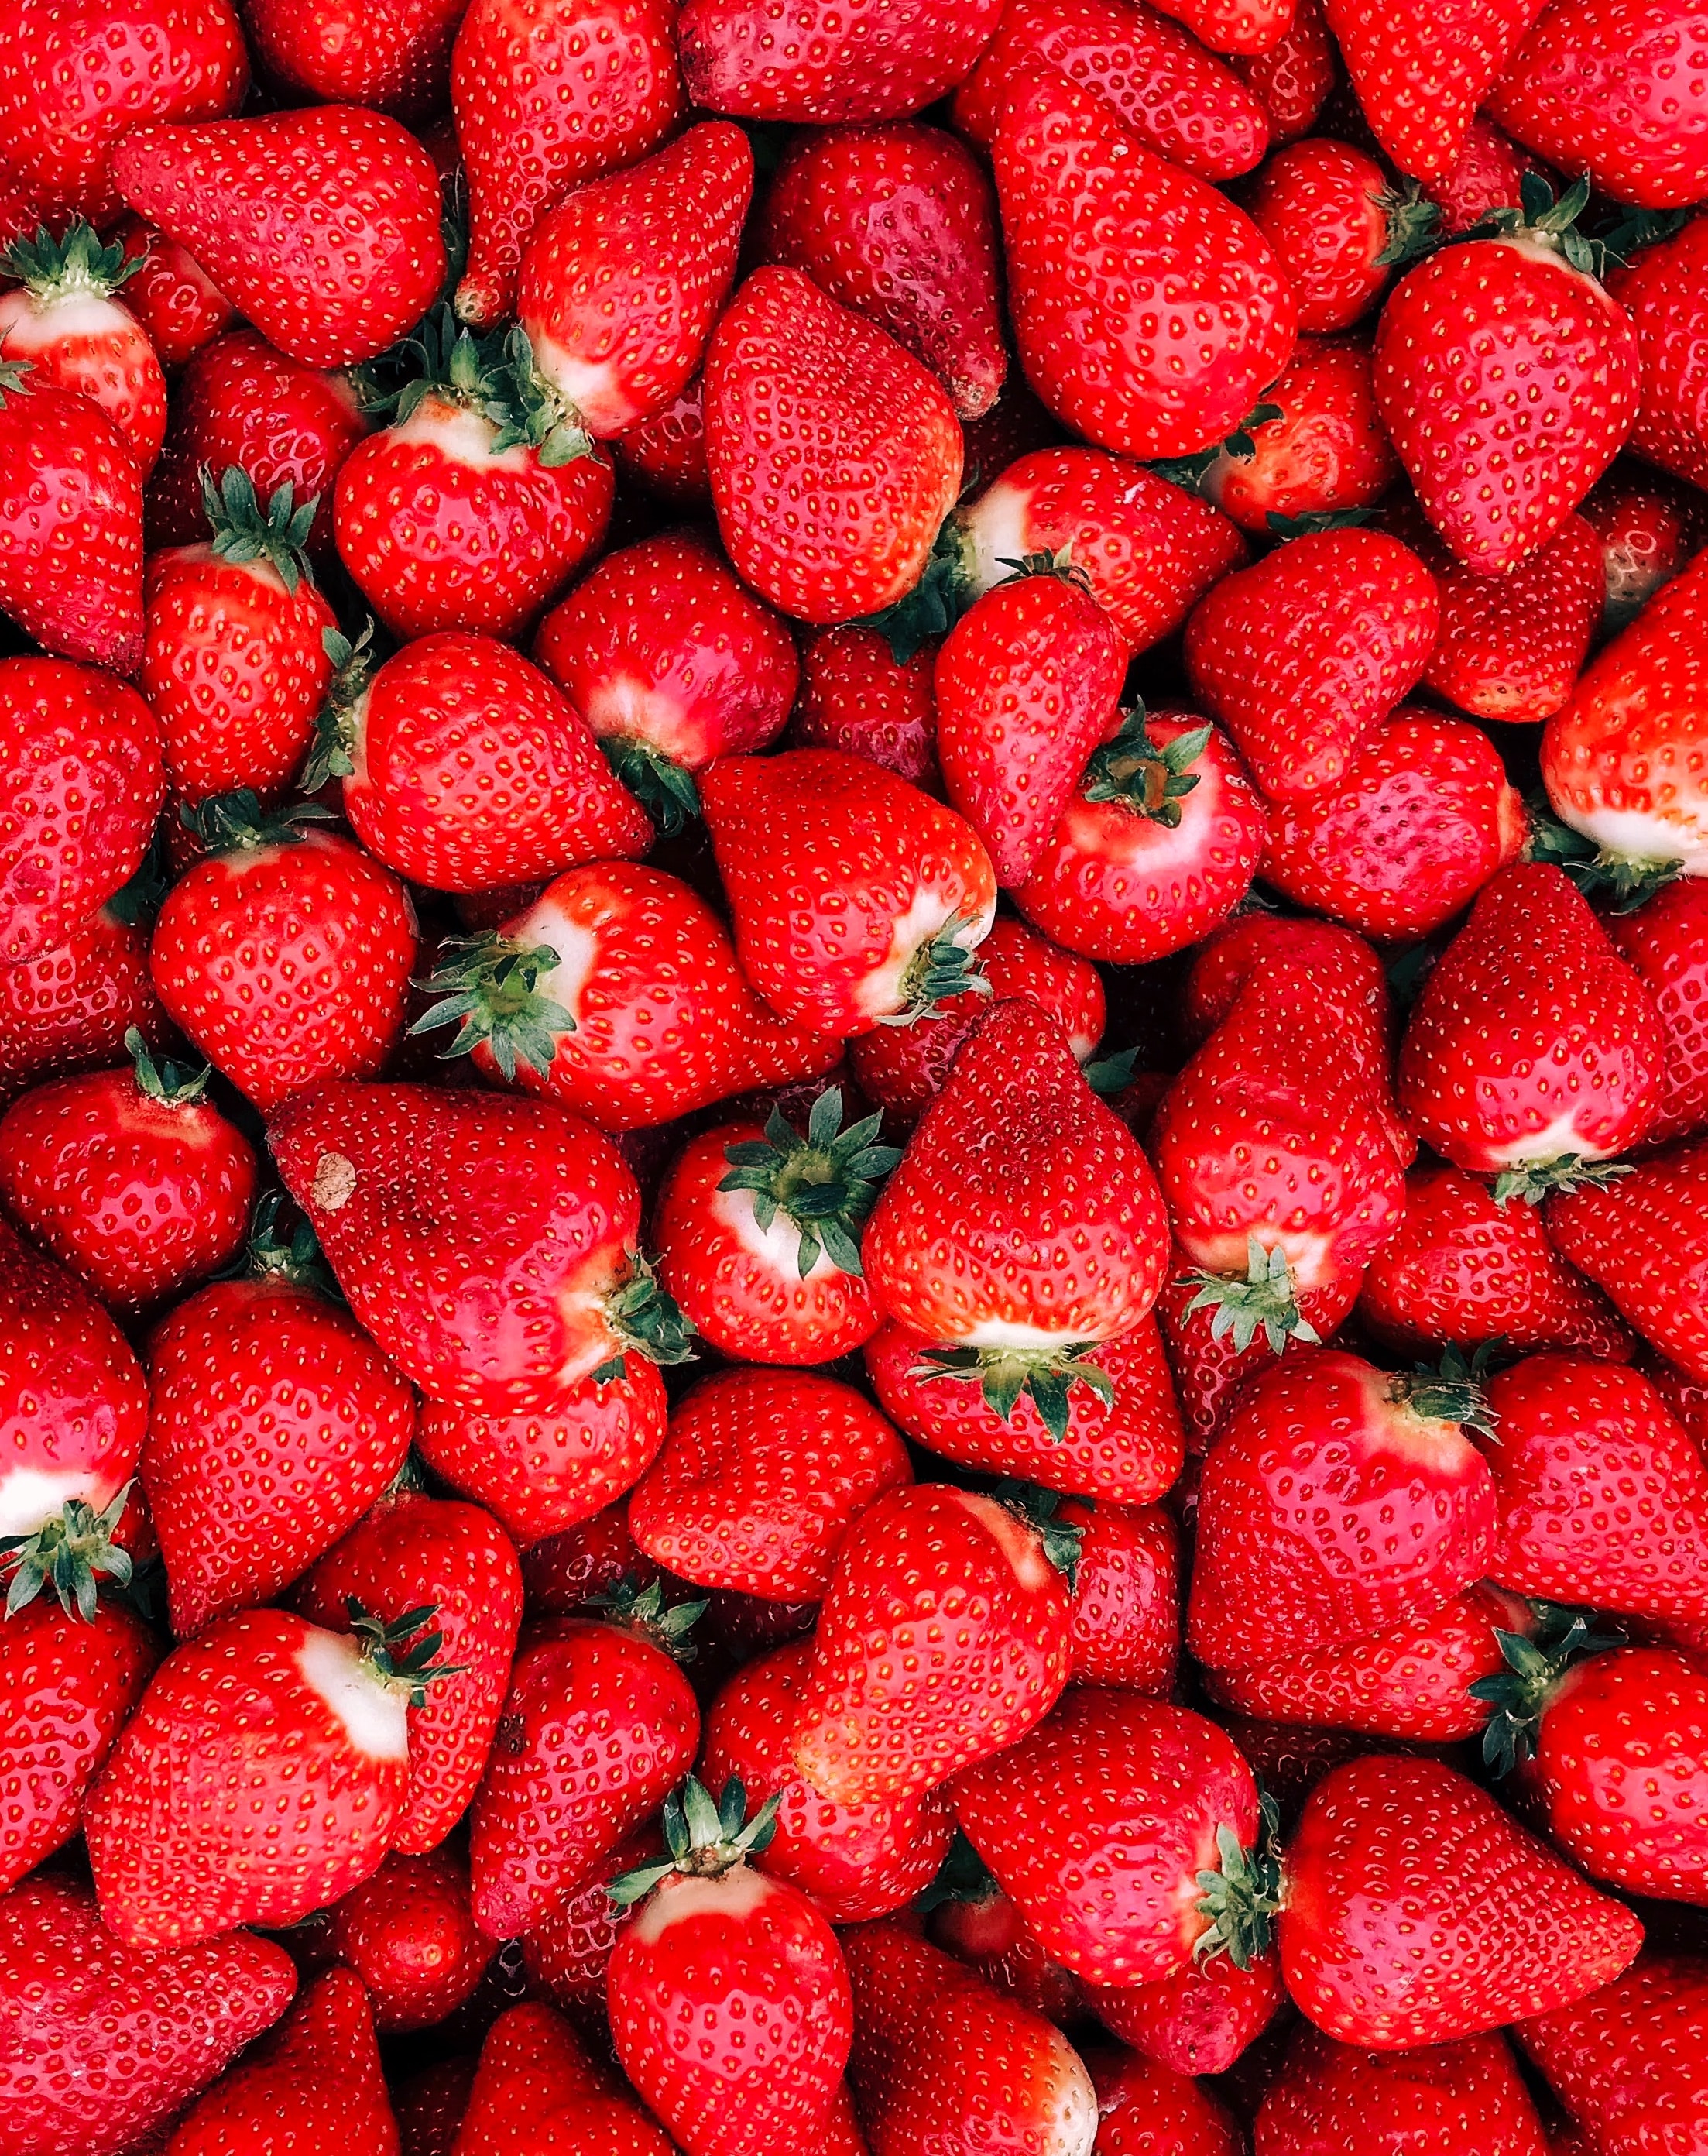 Strawberry fields forever? Strawberry production leaves long-term plastic pollution, research finds